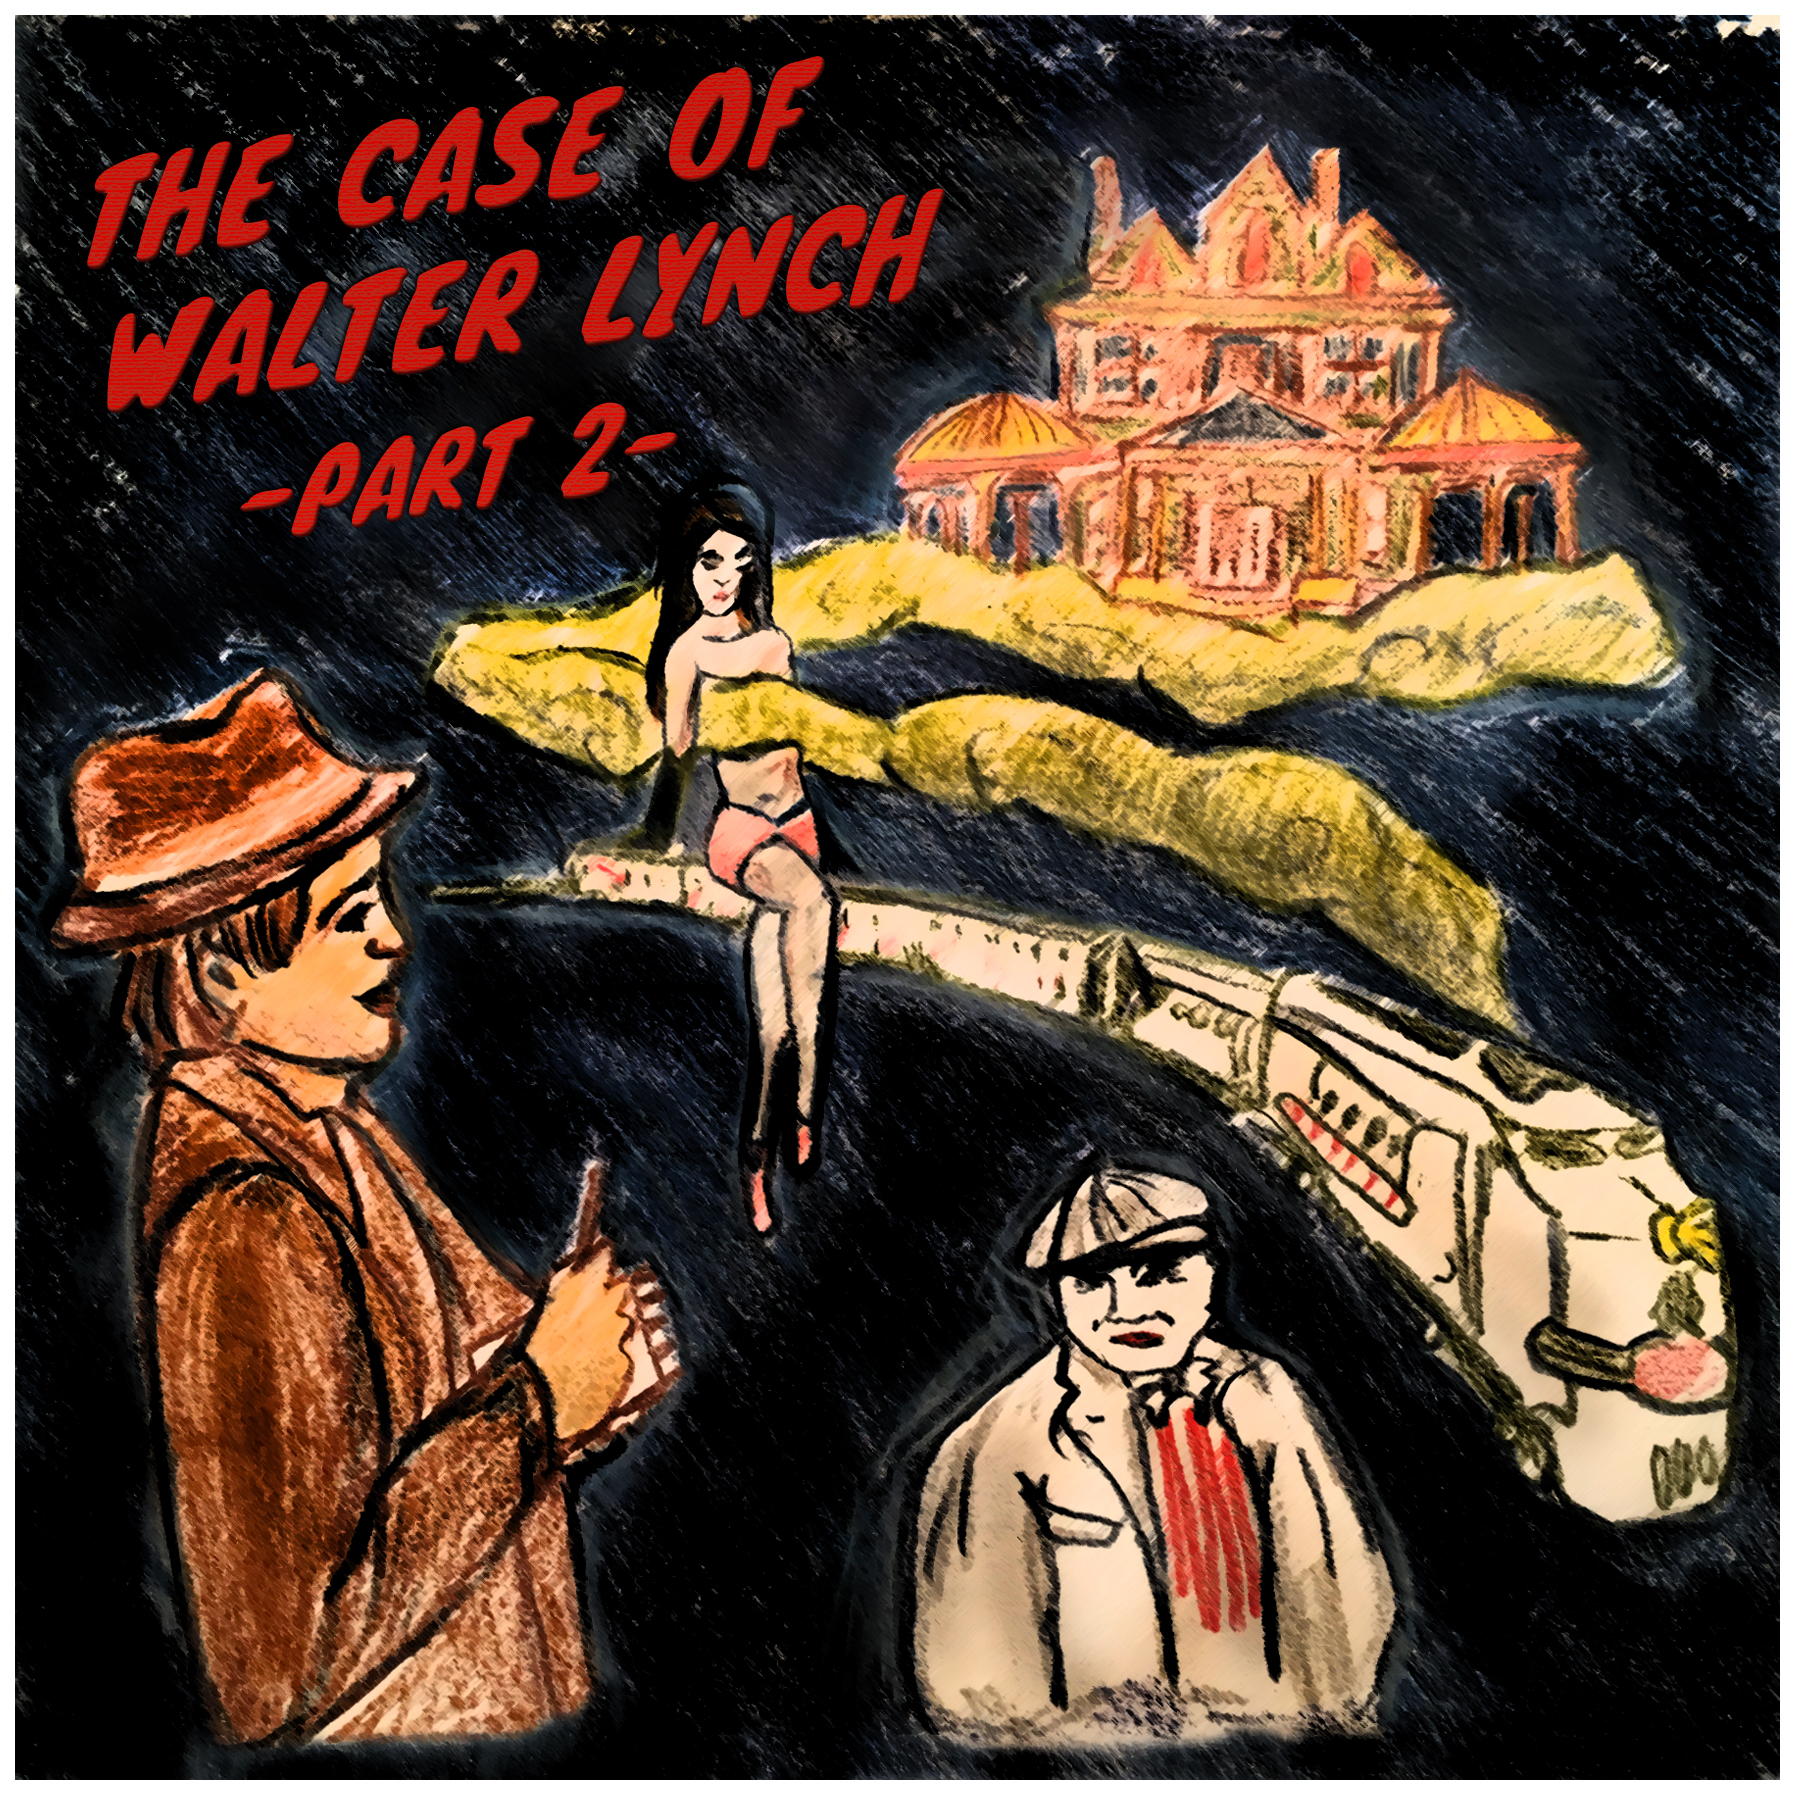 Episode 6 – The Case of Walter Lynch Part 2